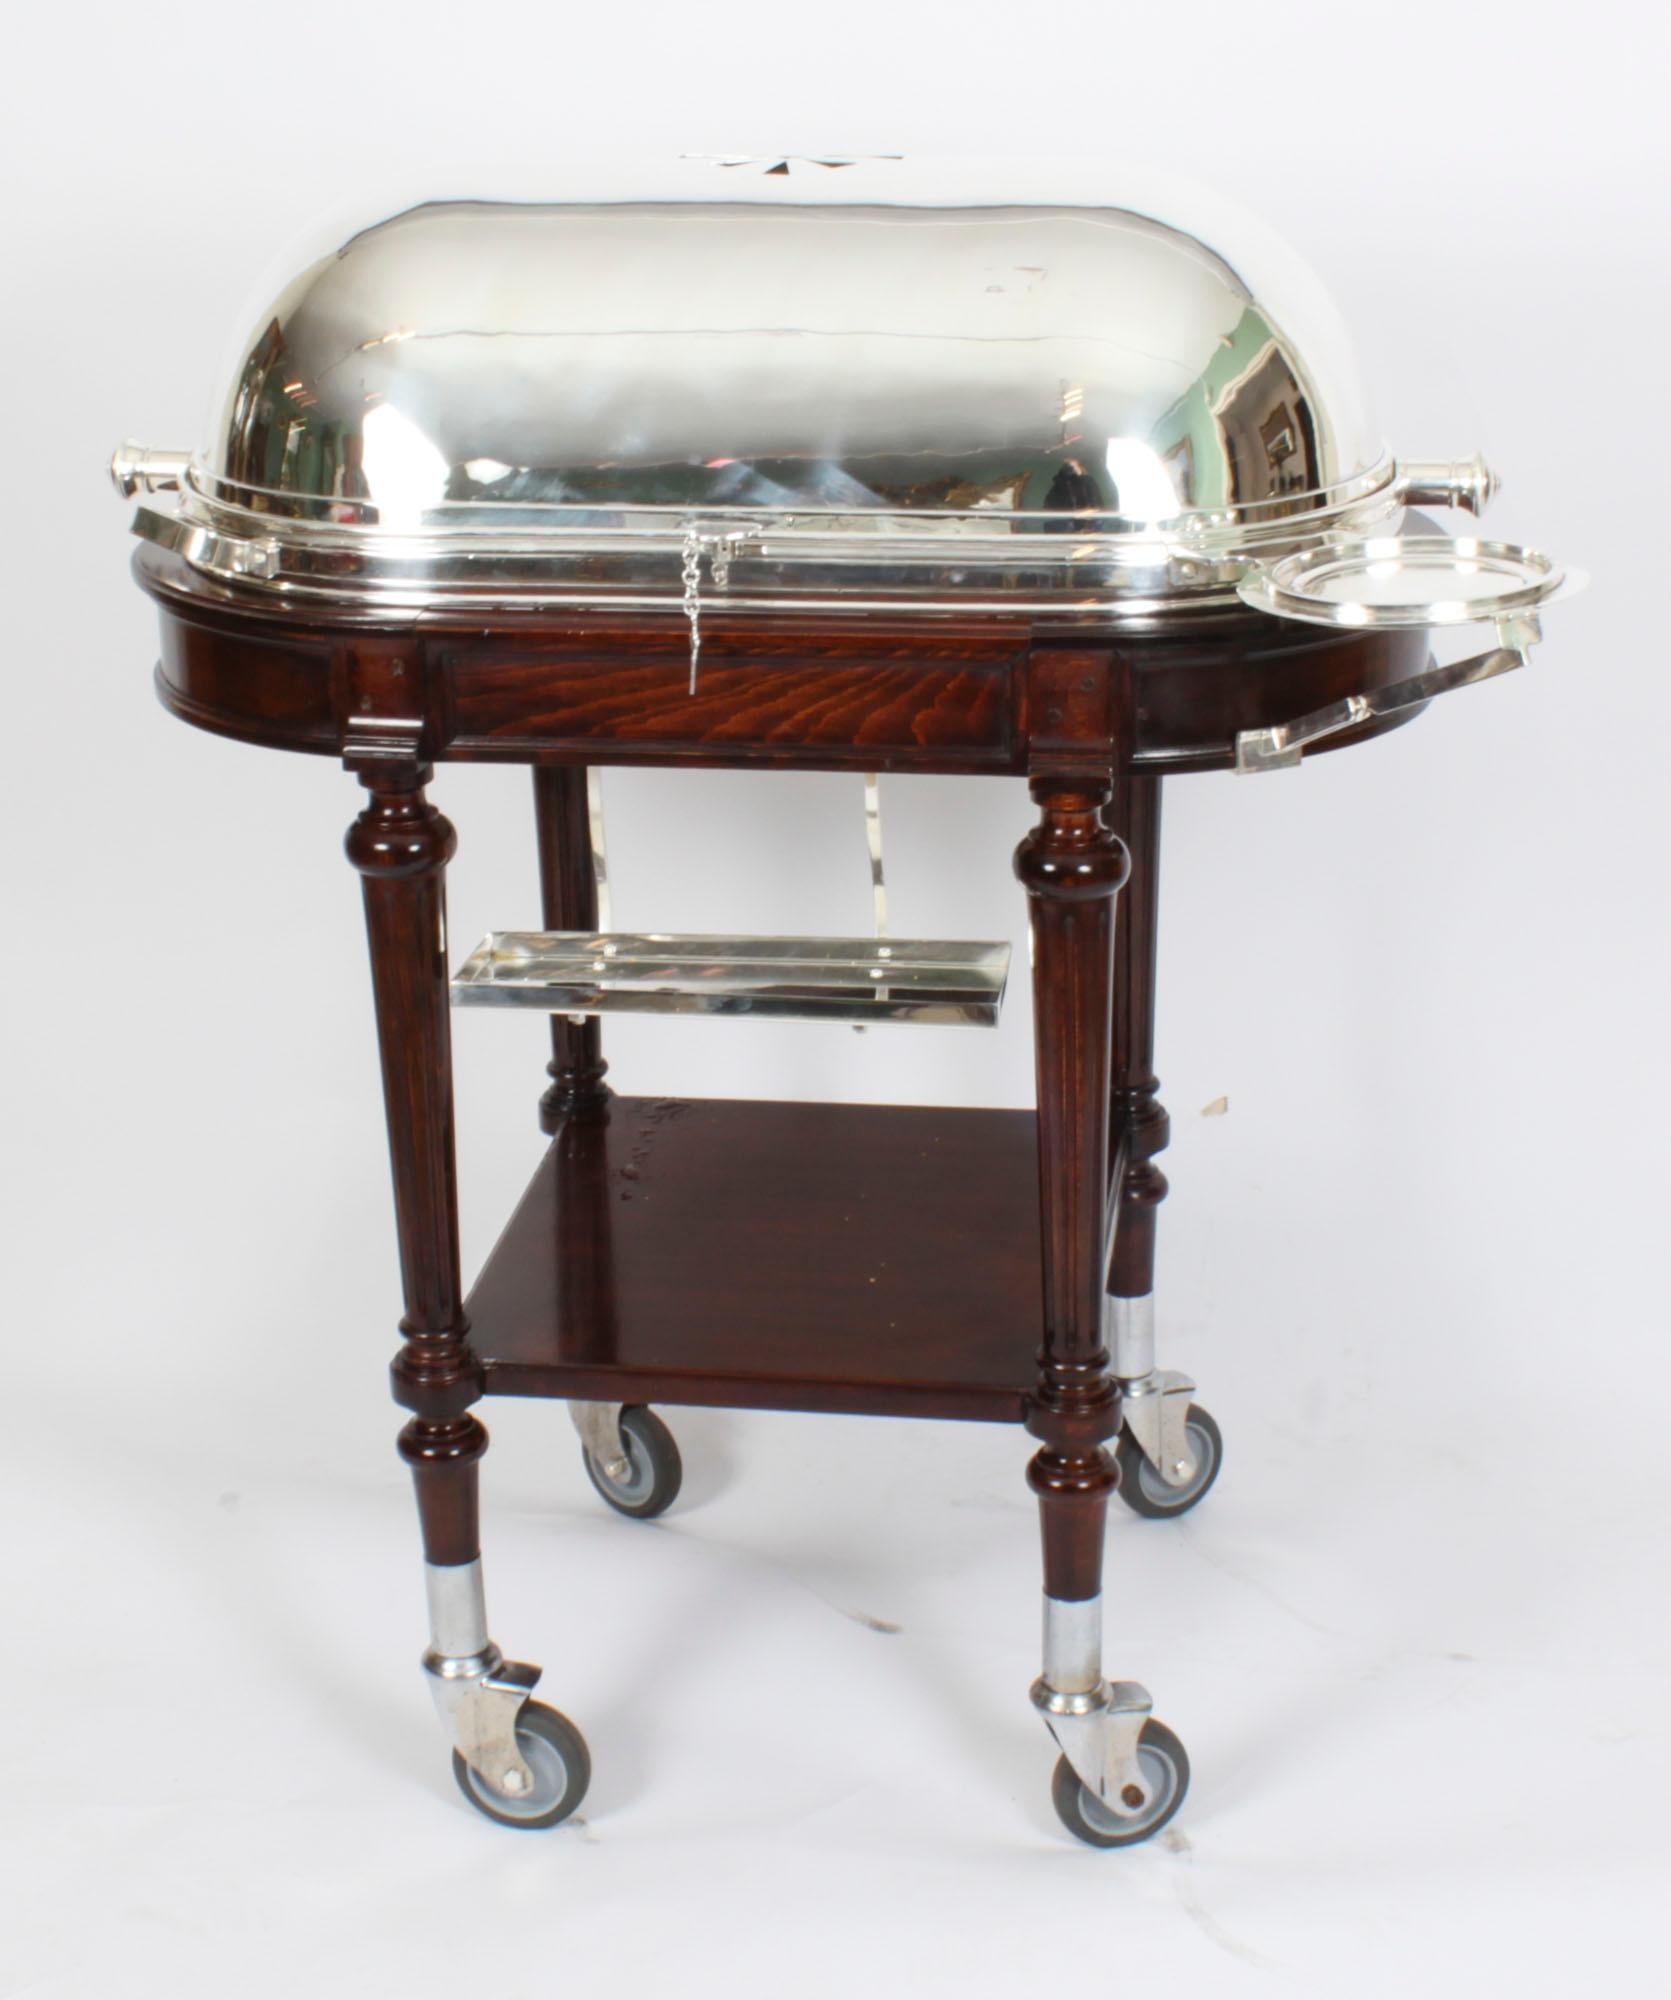 A magnificent and rare fully restored antique Art Deco silver plate beef trolley / serving cart on a decorative carved walnut base, circa 1920 in date.
 
This stunning trolley is suitable for serving cooked meats such as roast beef, lamb, and